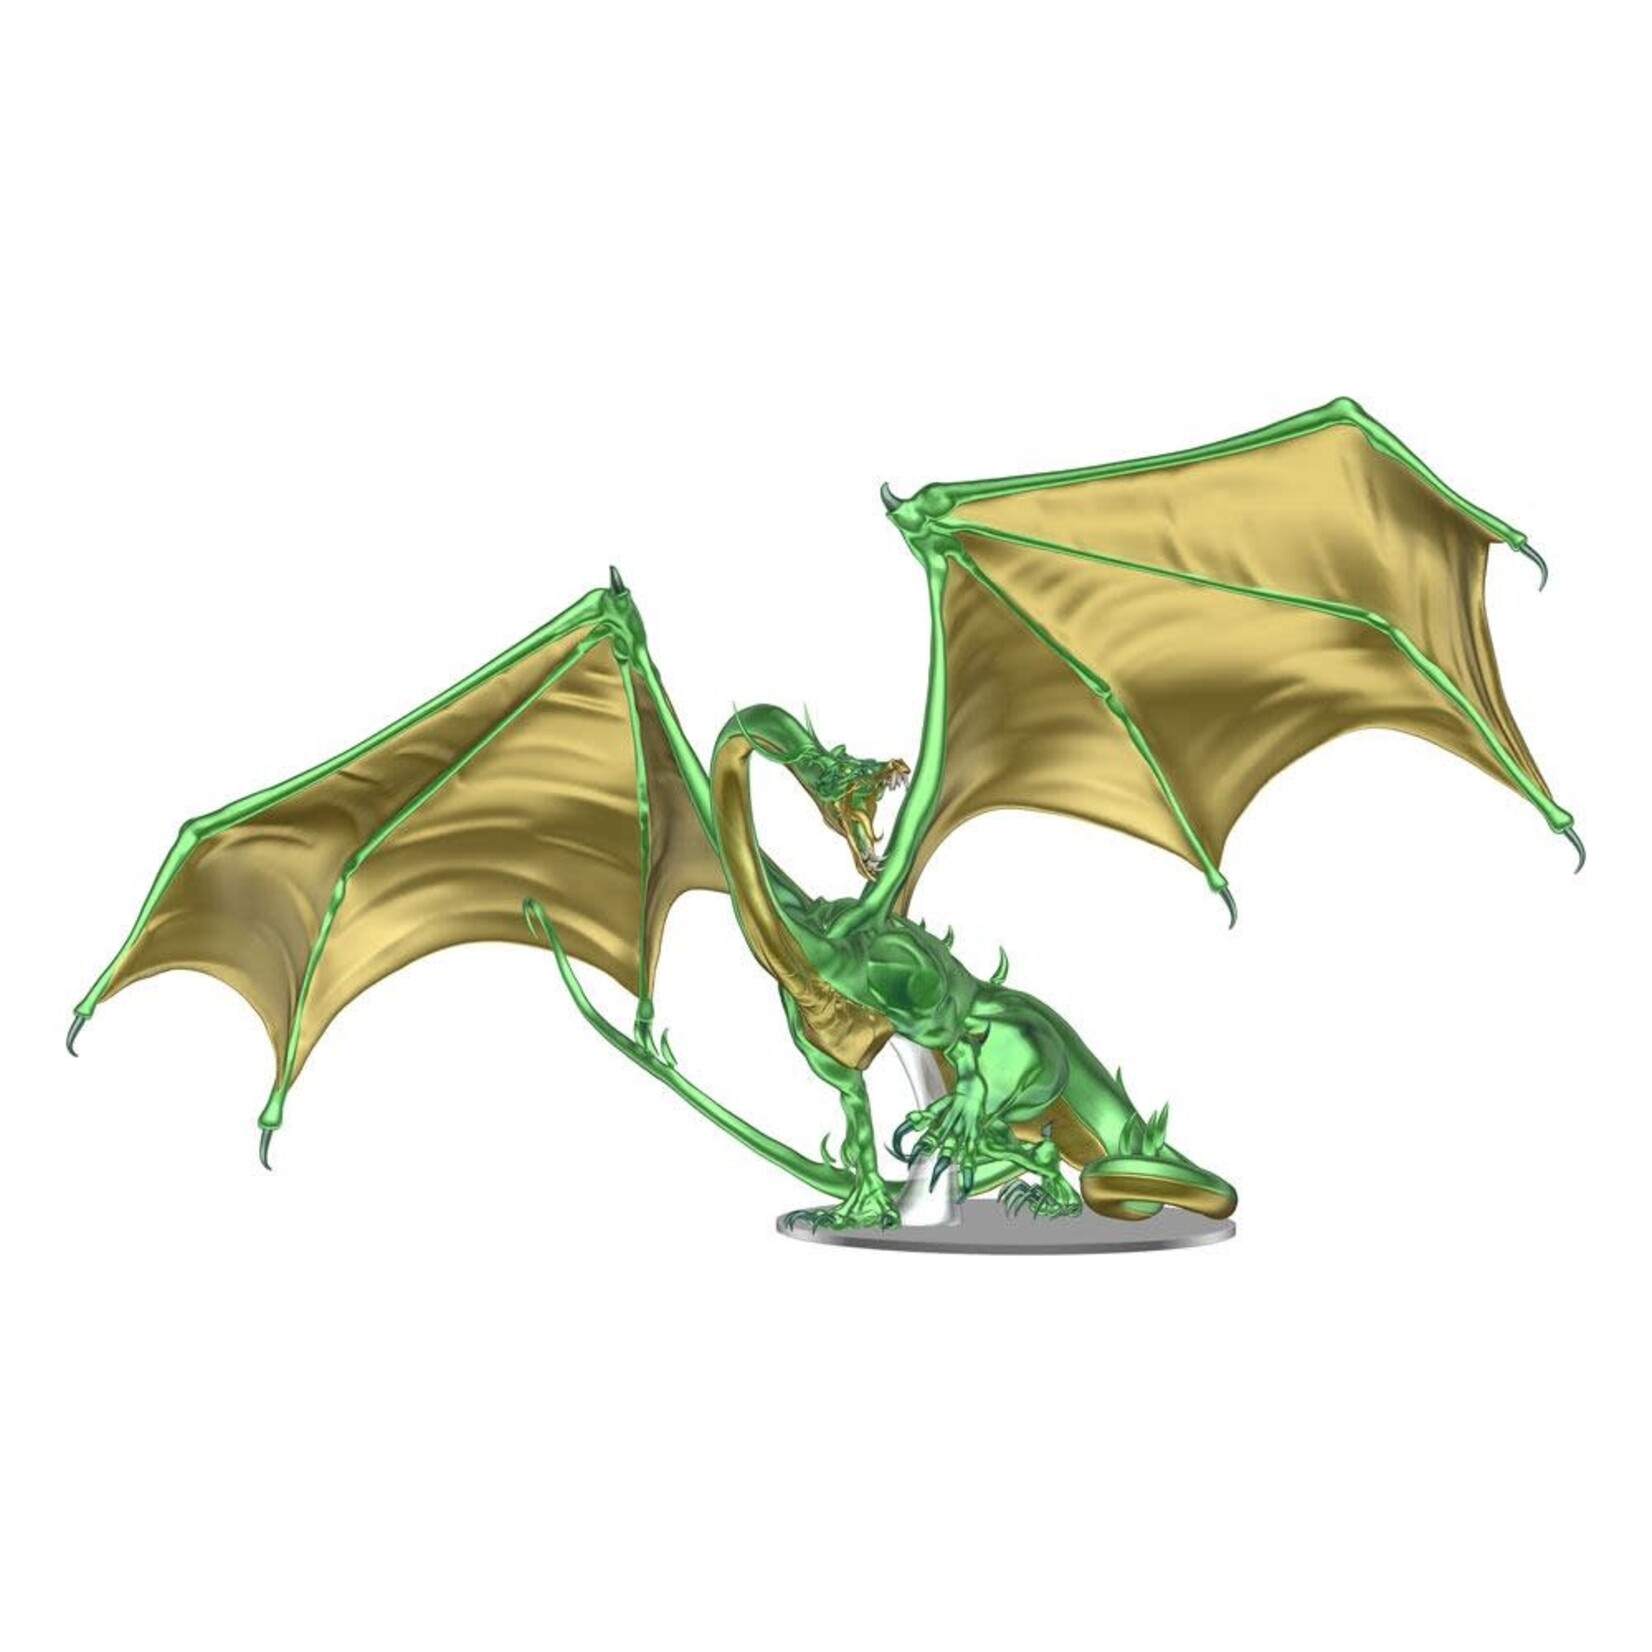 WizKids Dungeons & Dragons Fantasy Miniatures: Icons of the Realms - Adult Emerald Dragon Premium Figure